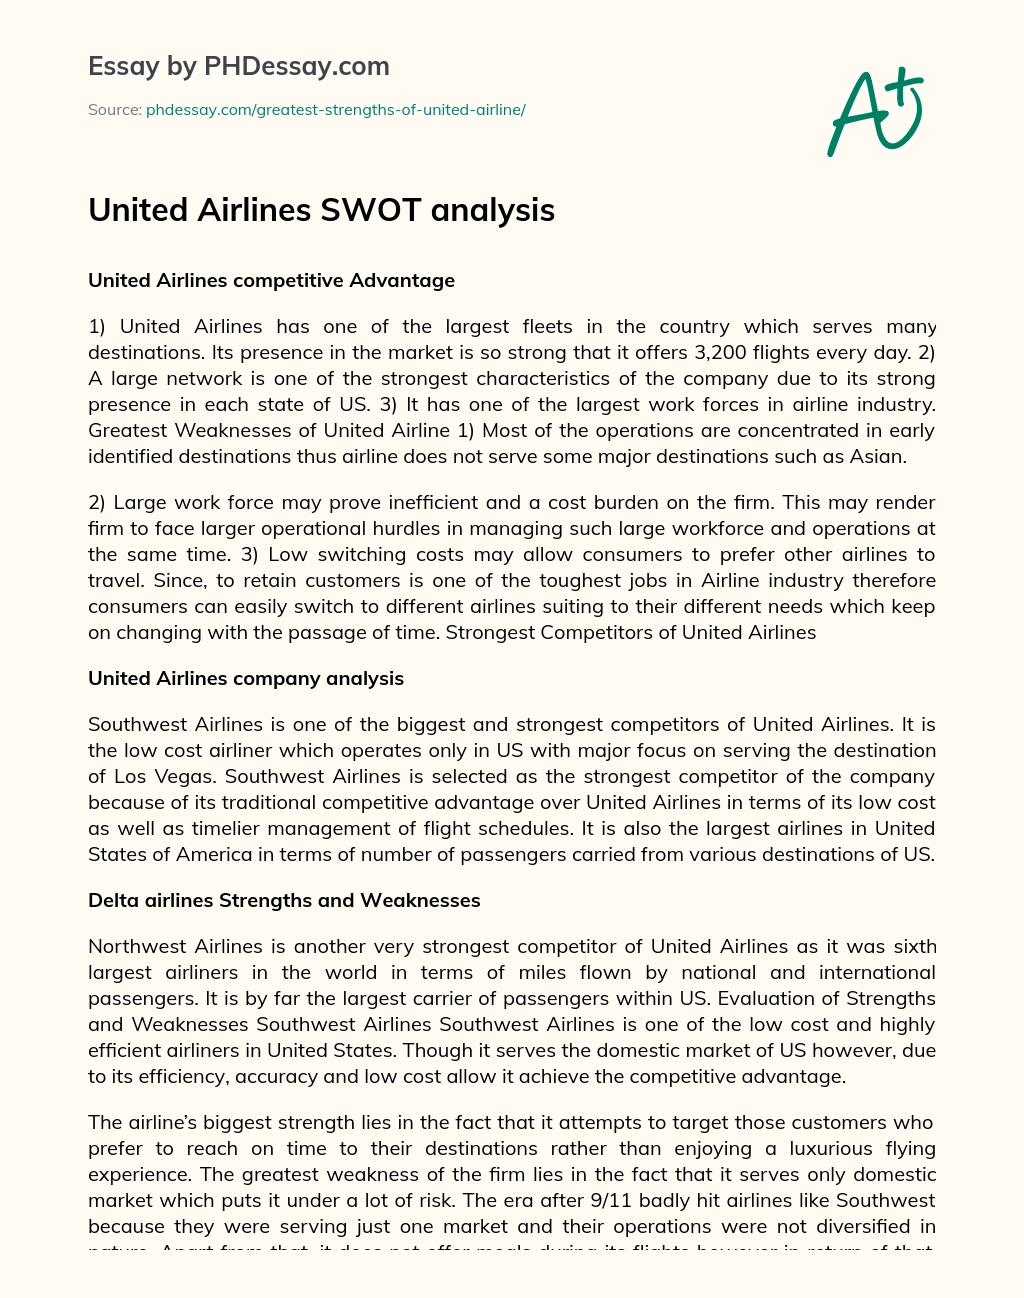 United Airlines SWOT analysis essay